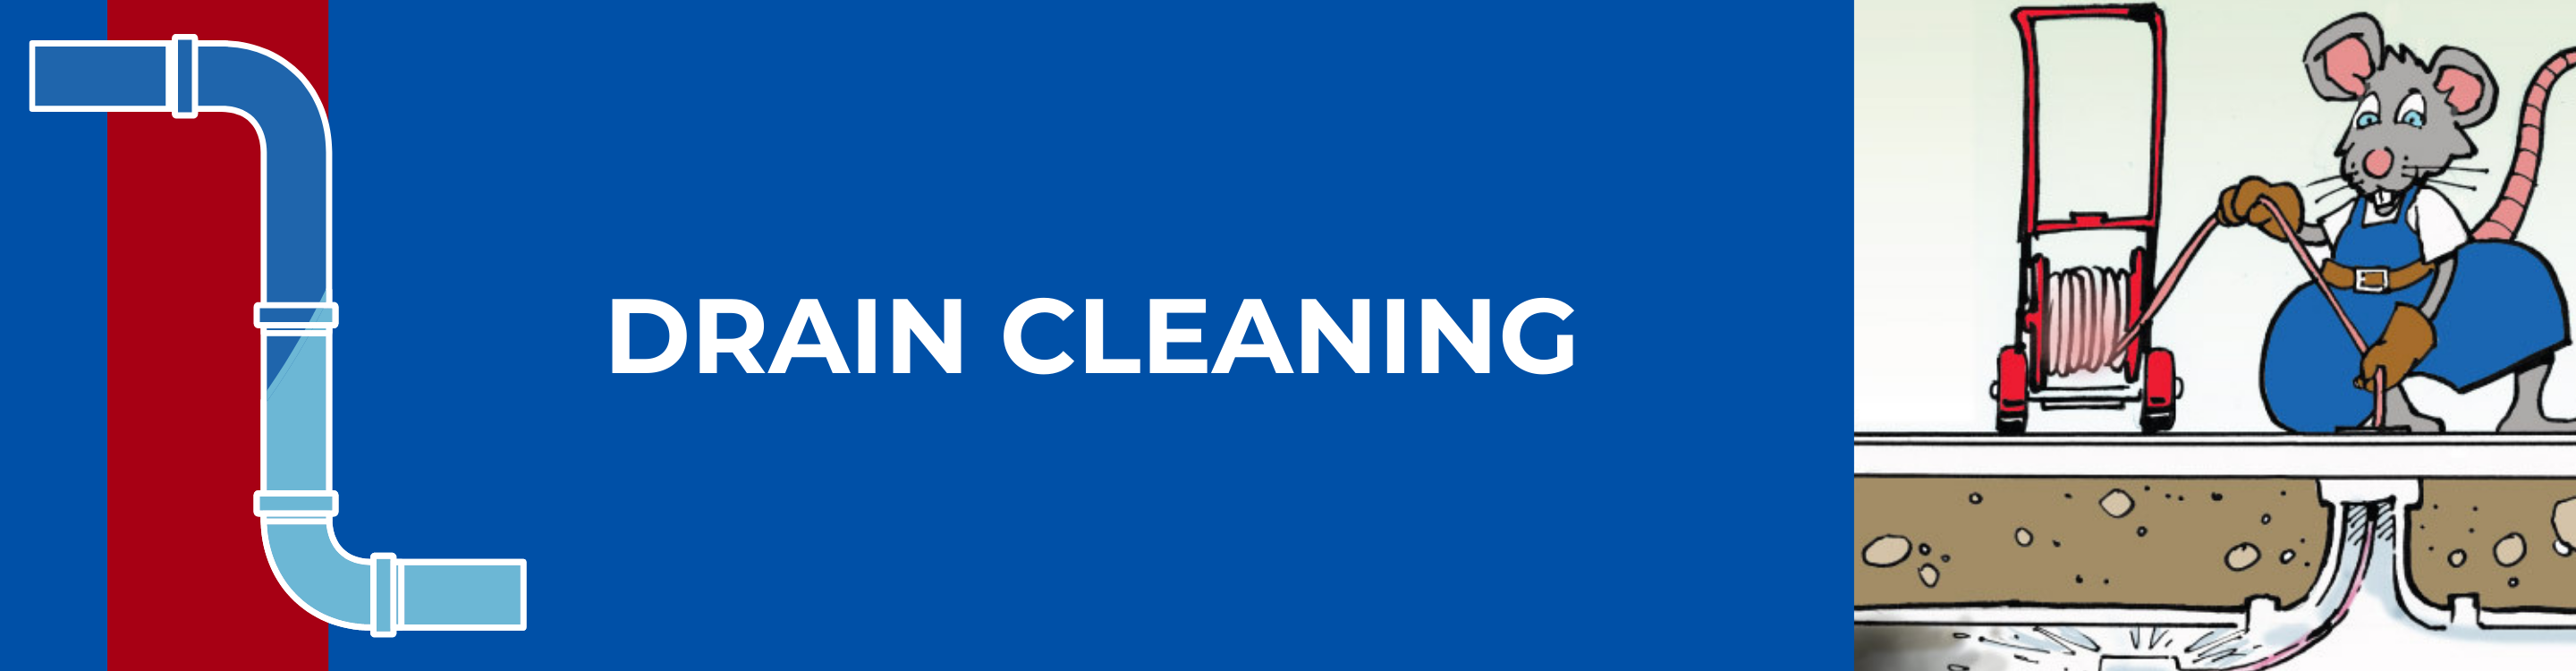 Drainage Cleaning Minneapolis